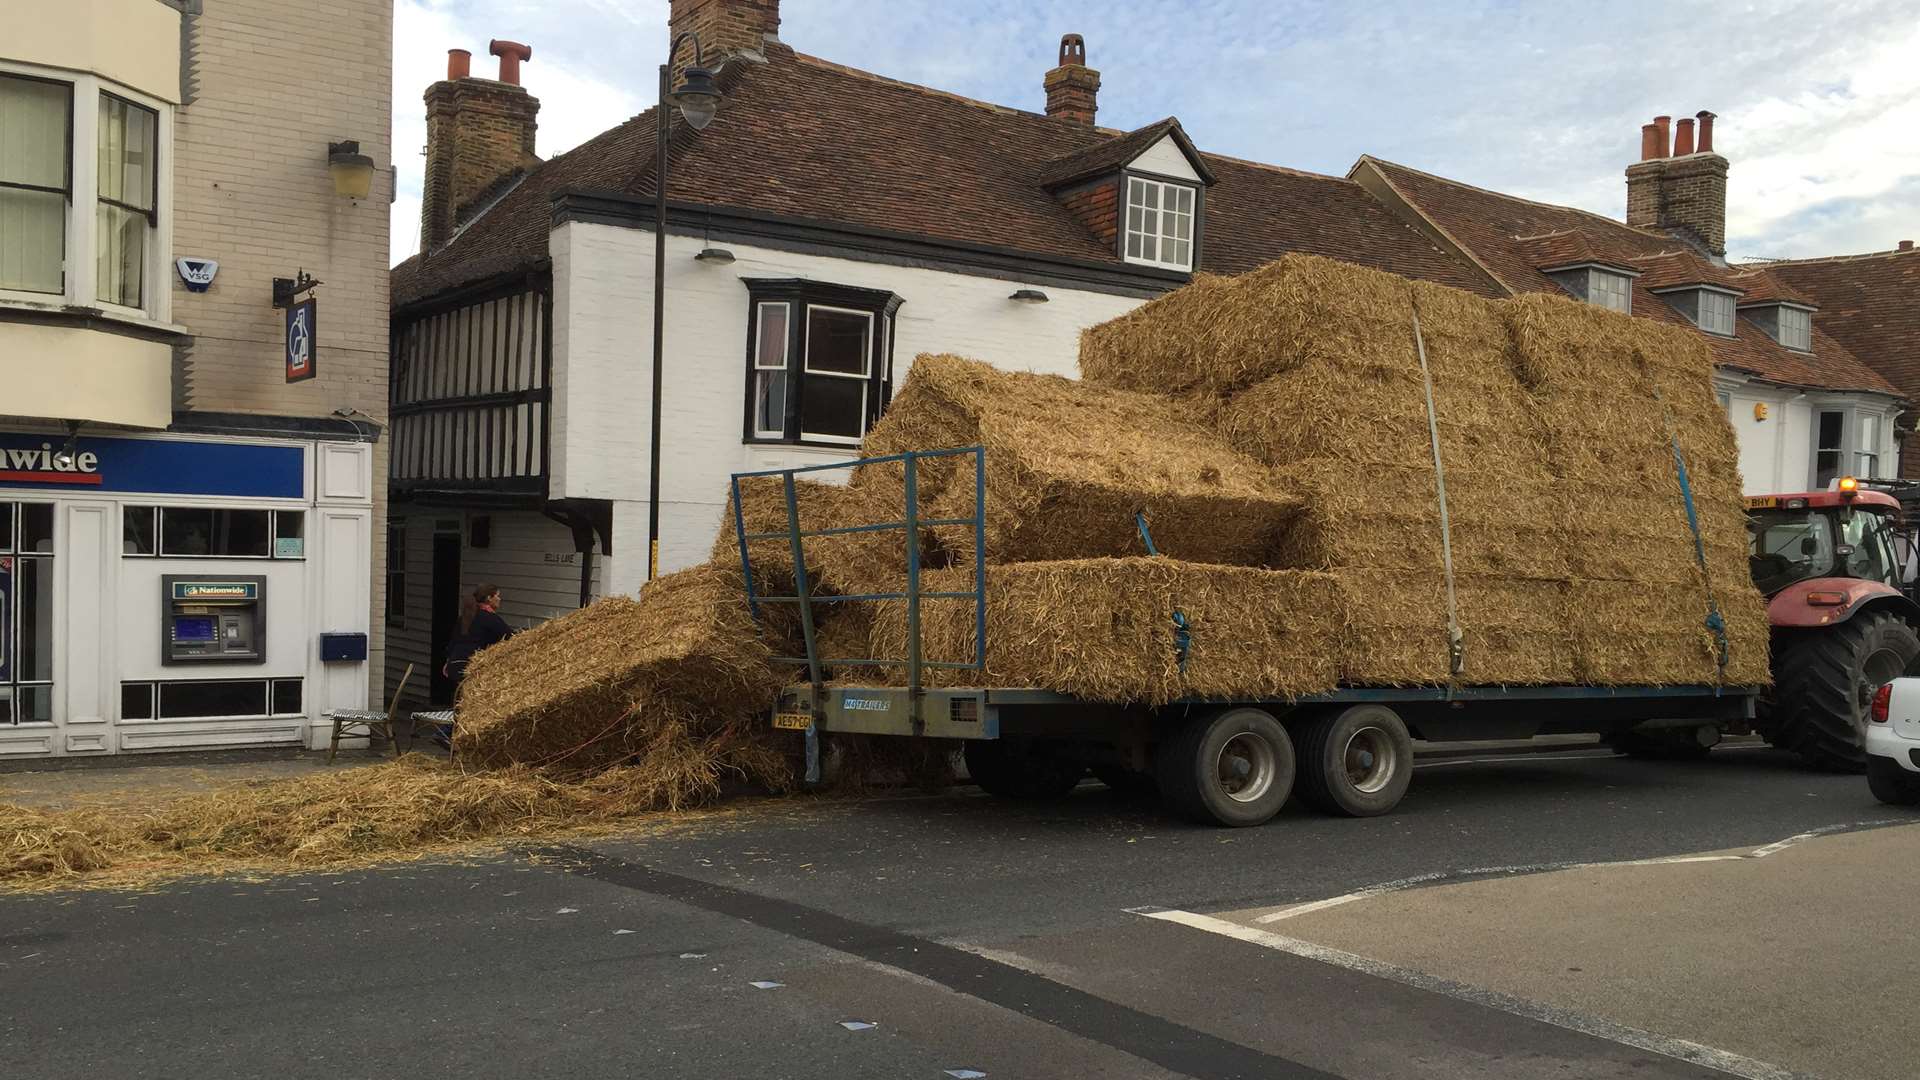 The trailer that shed its load of straw